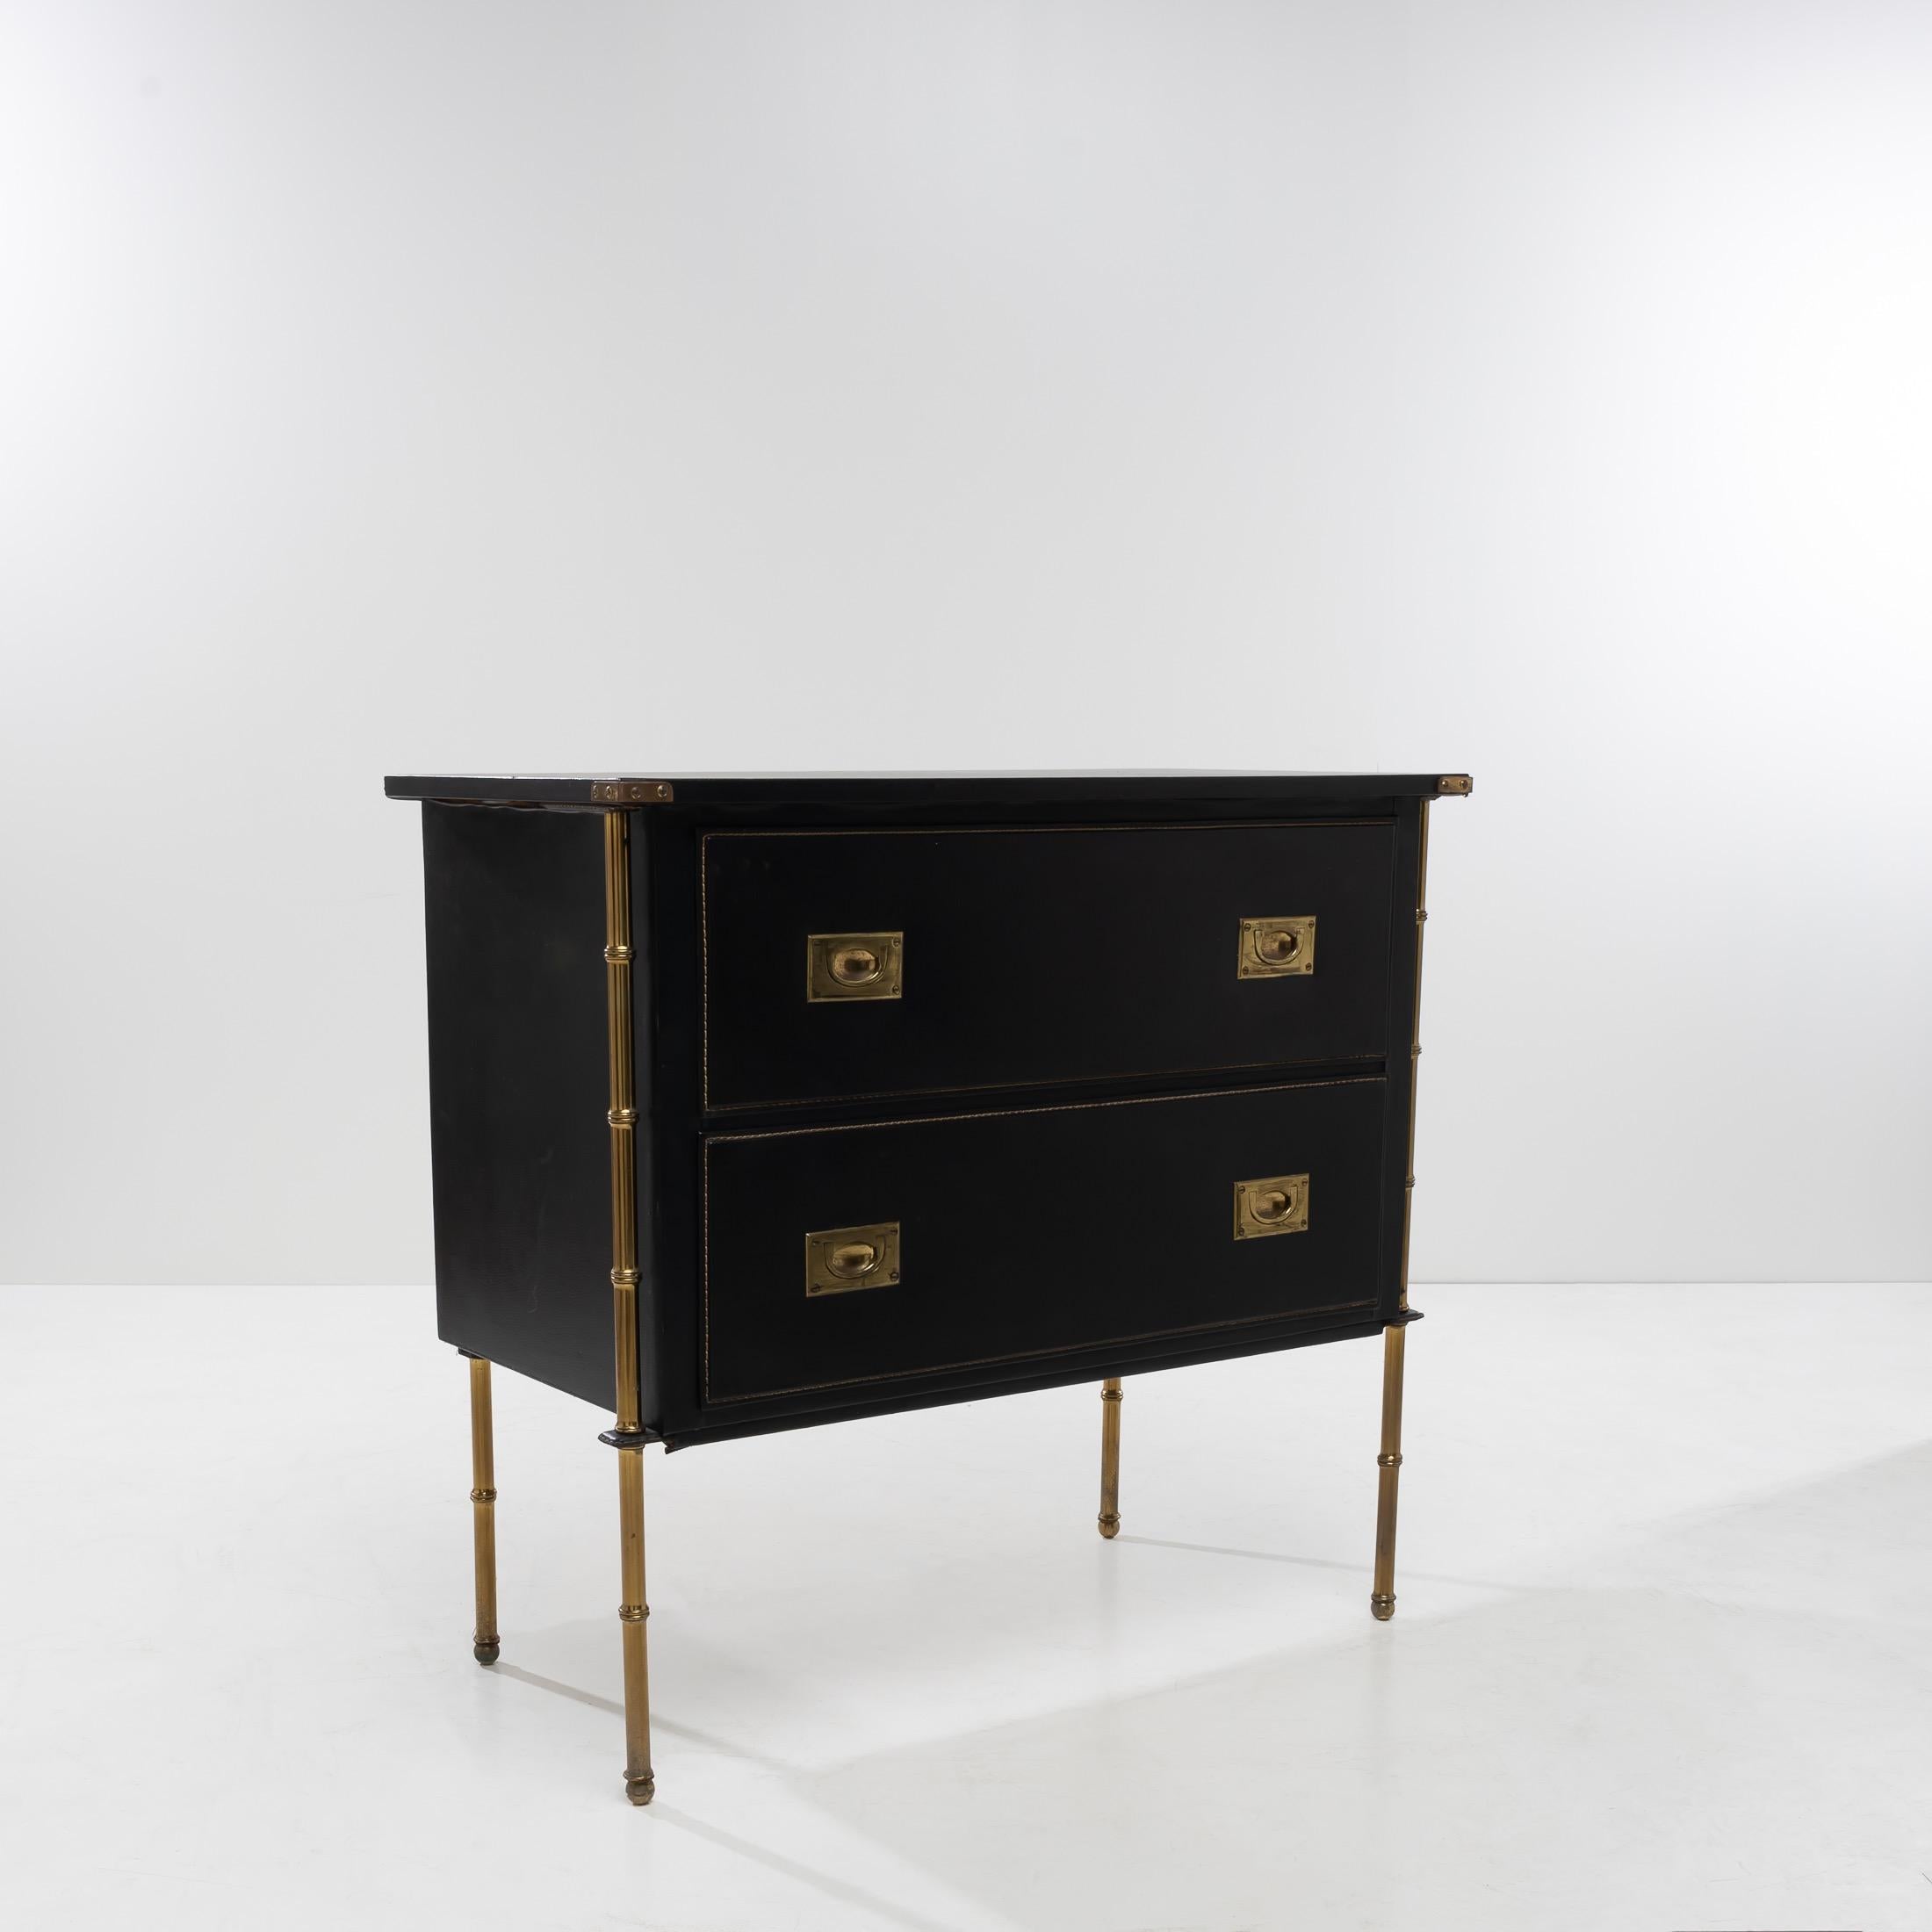 About this Chest of drawers with two drawers by Jacques Adnet
Chest of drawers with two drawers, the wooden structure entirely covered in black imitation leather.
The brass feet in faux-bamboo finished with balls. On the front, they extend along